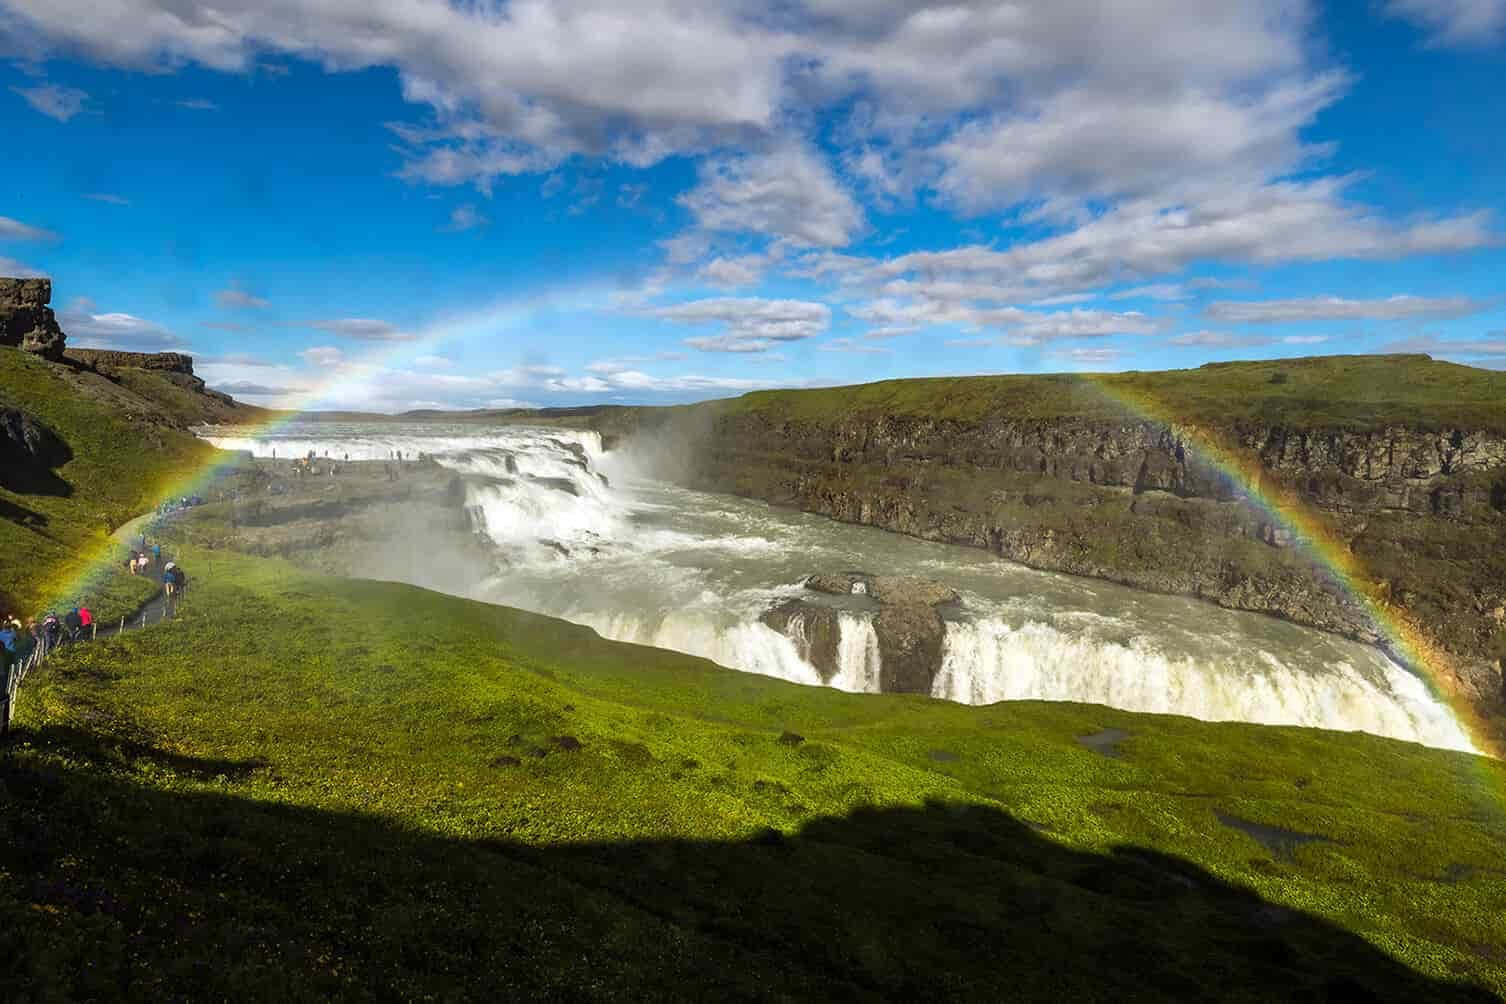 Majestic Gullfoss Waterfall with a colorful rainbow arch in scenic Southwest Iceland. Wallpaper